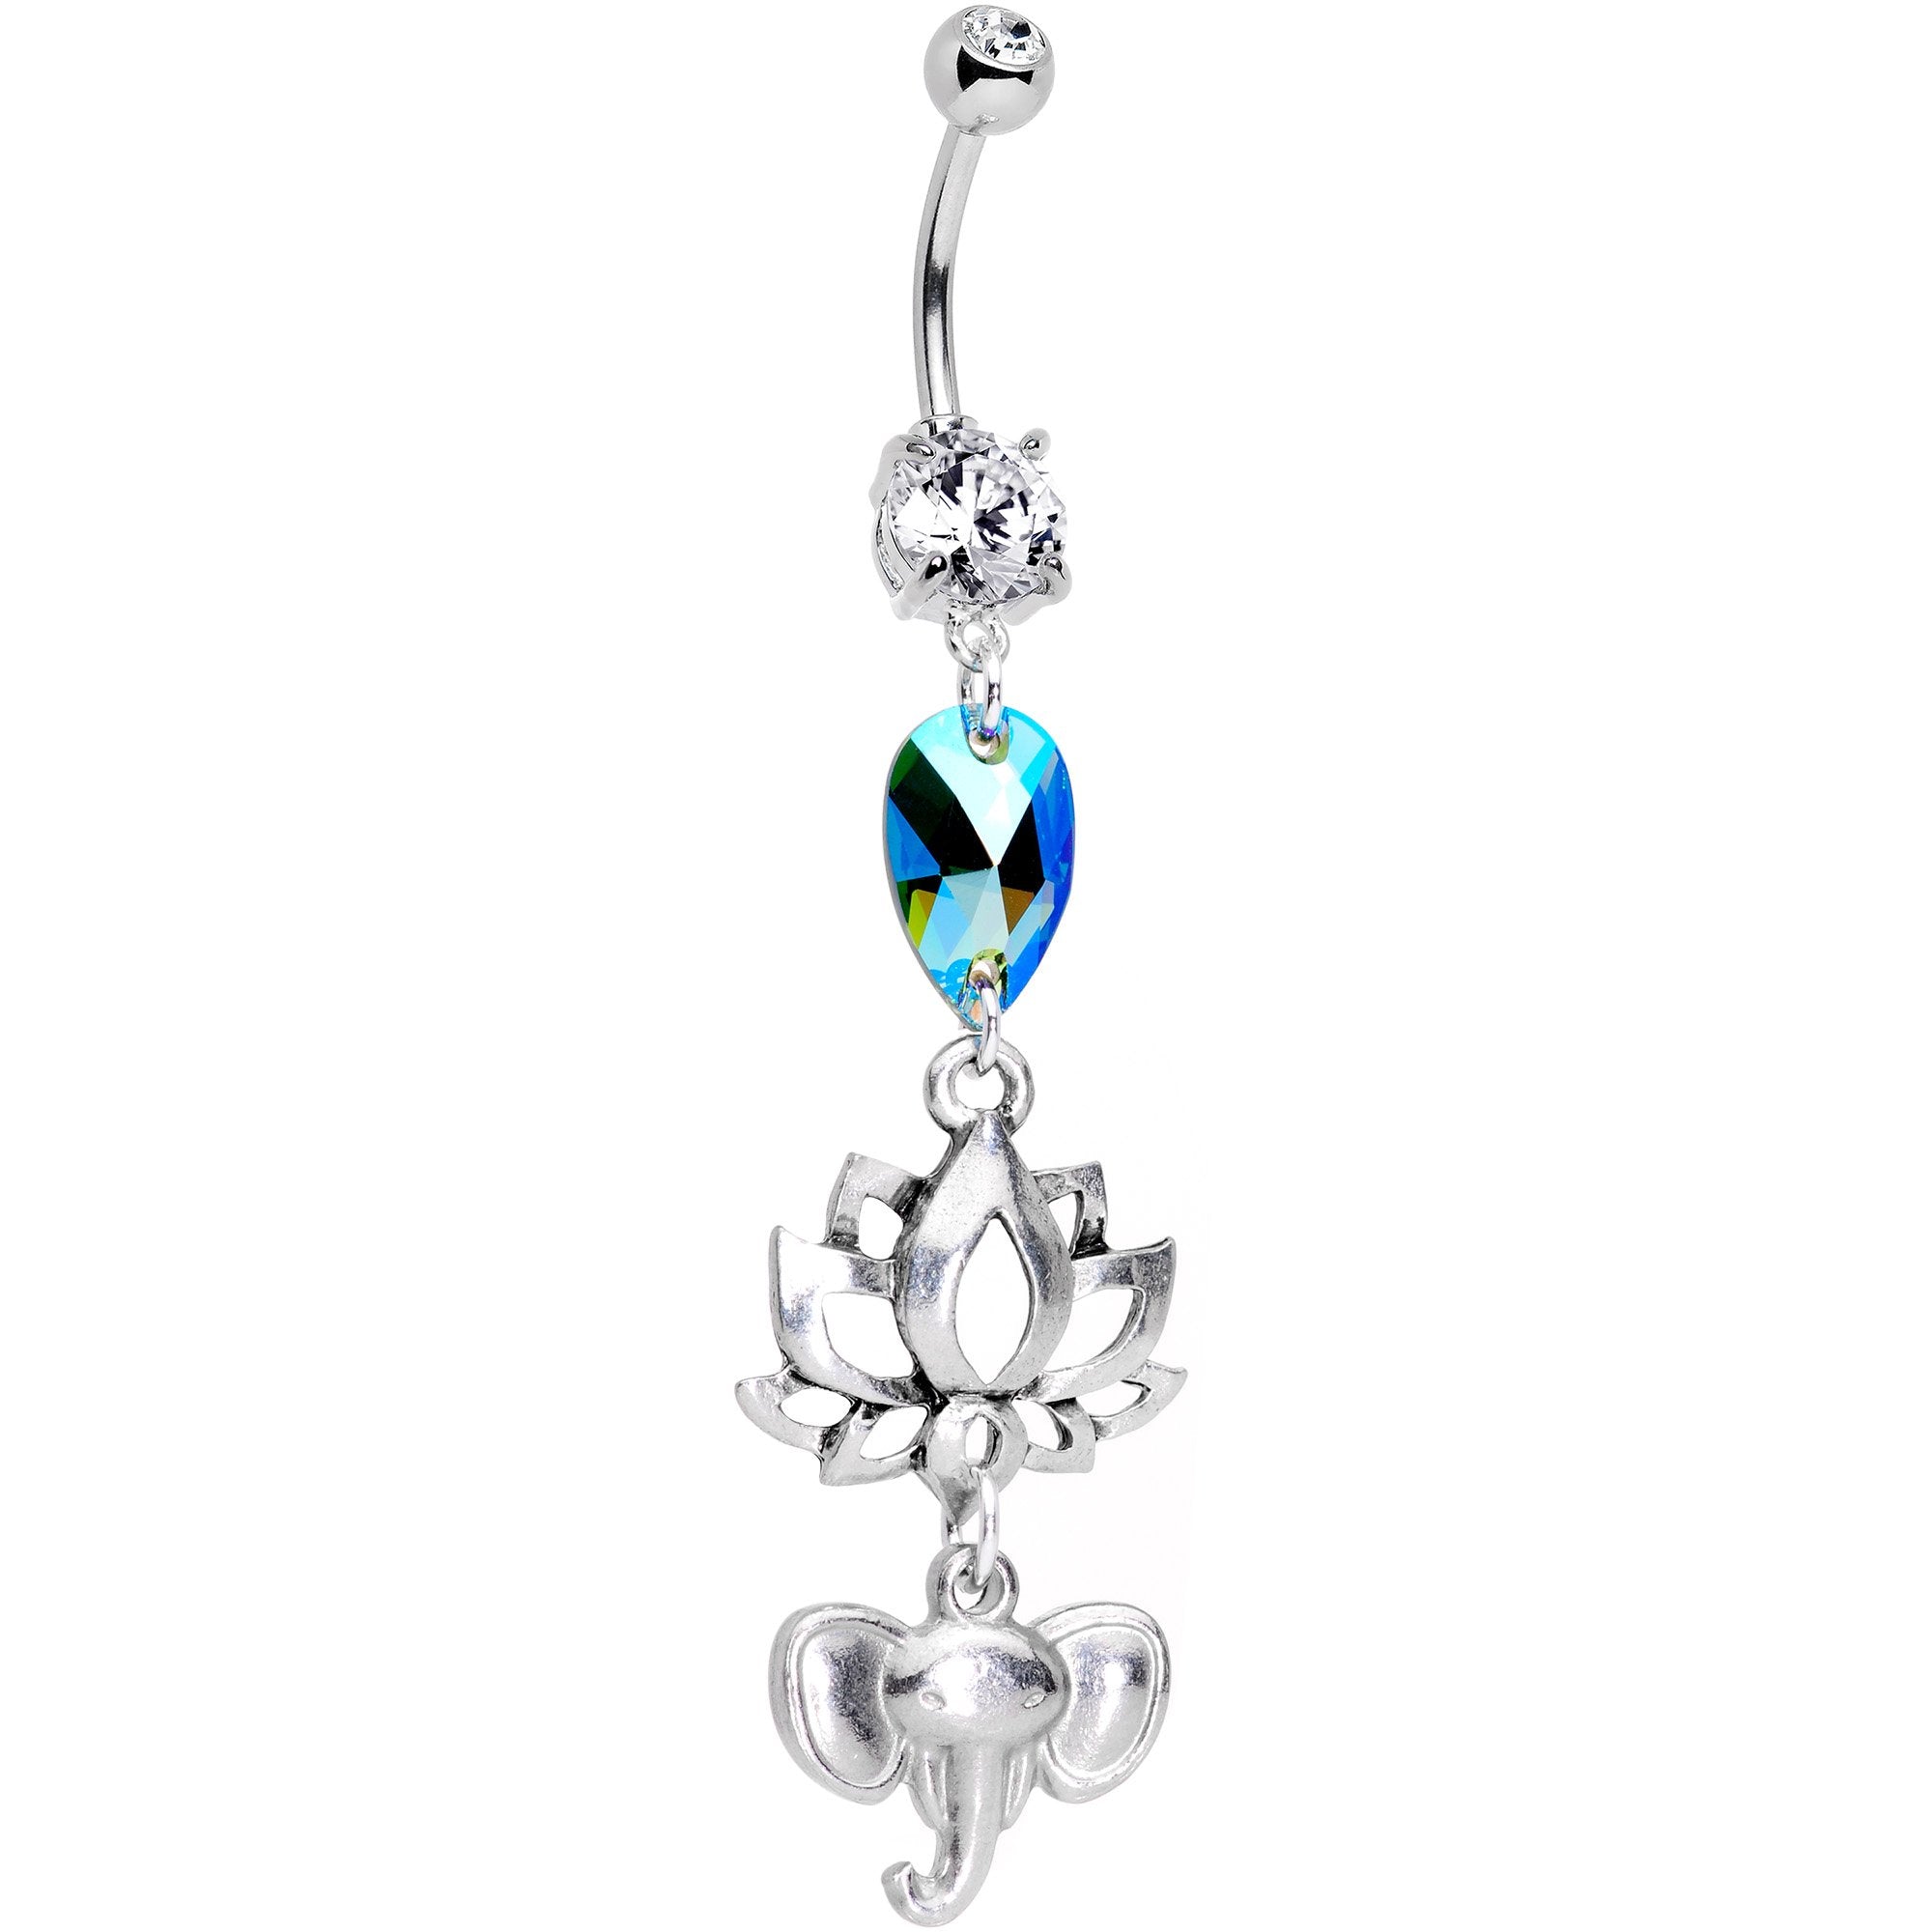 Handmade Zen Spirit Dangle Belly Ring Created with Crystals